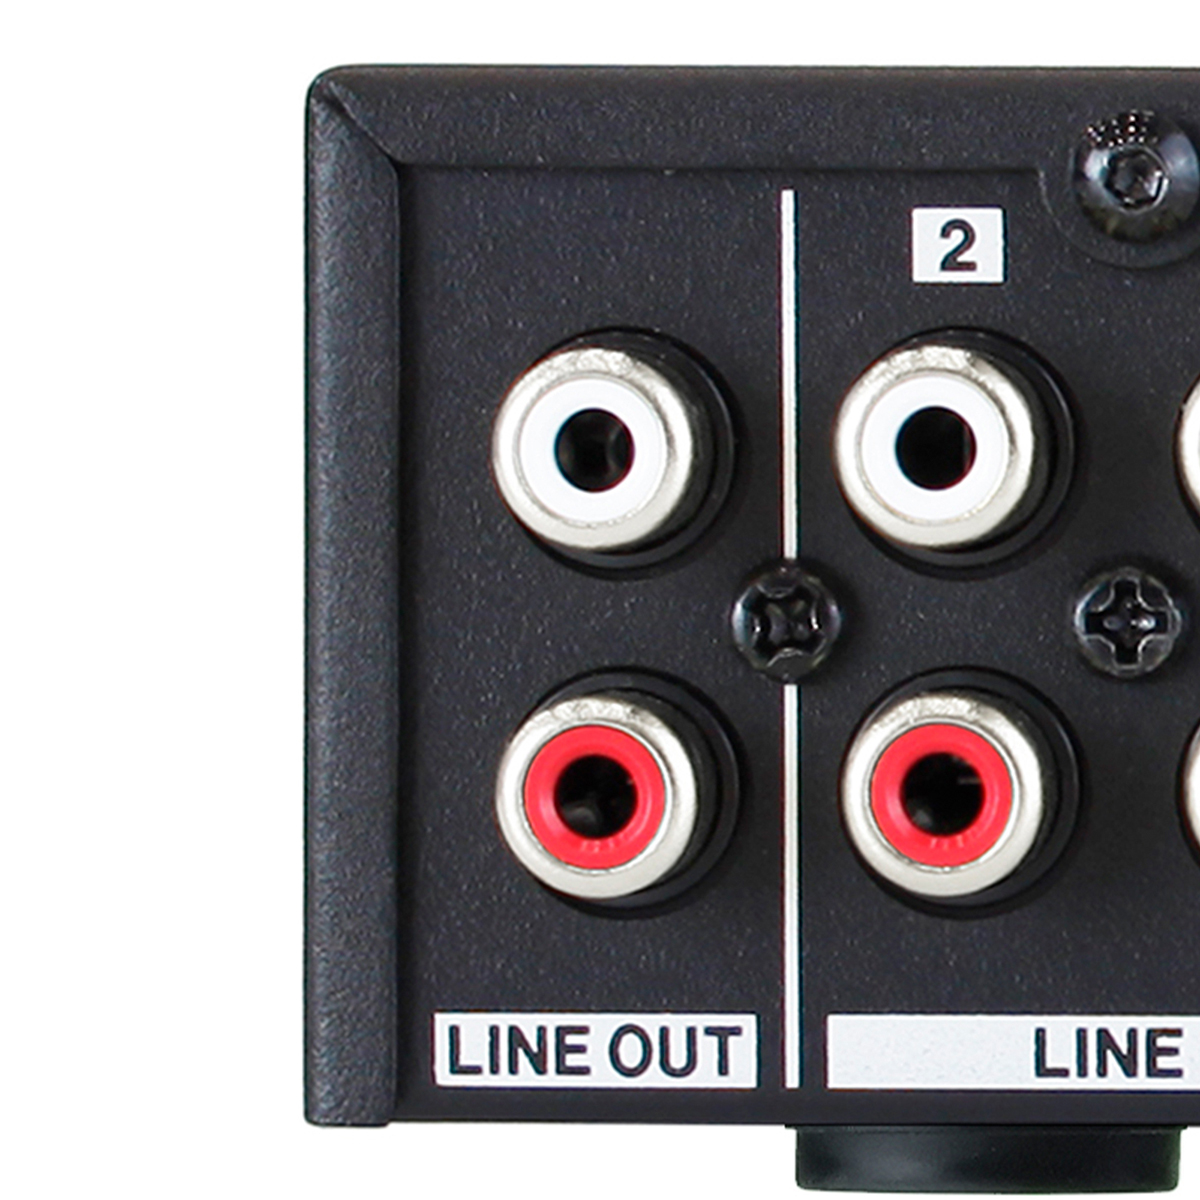 Line Output for Expanding Your Speaker System